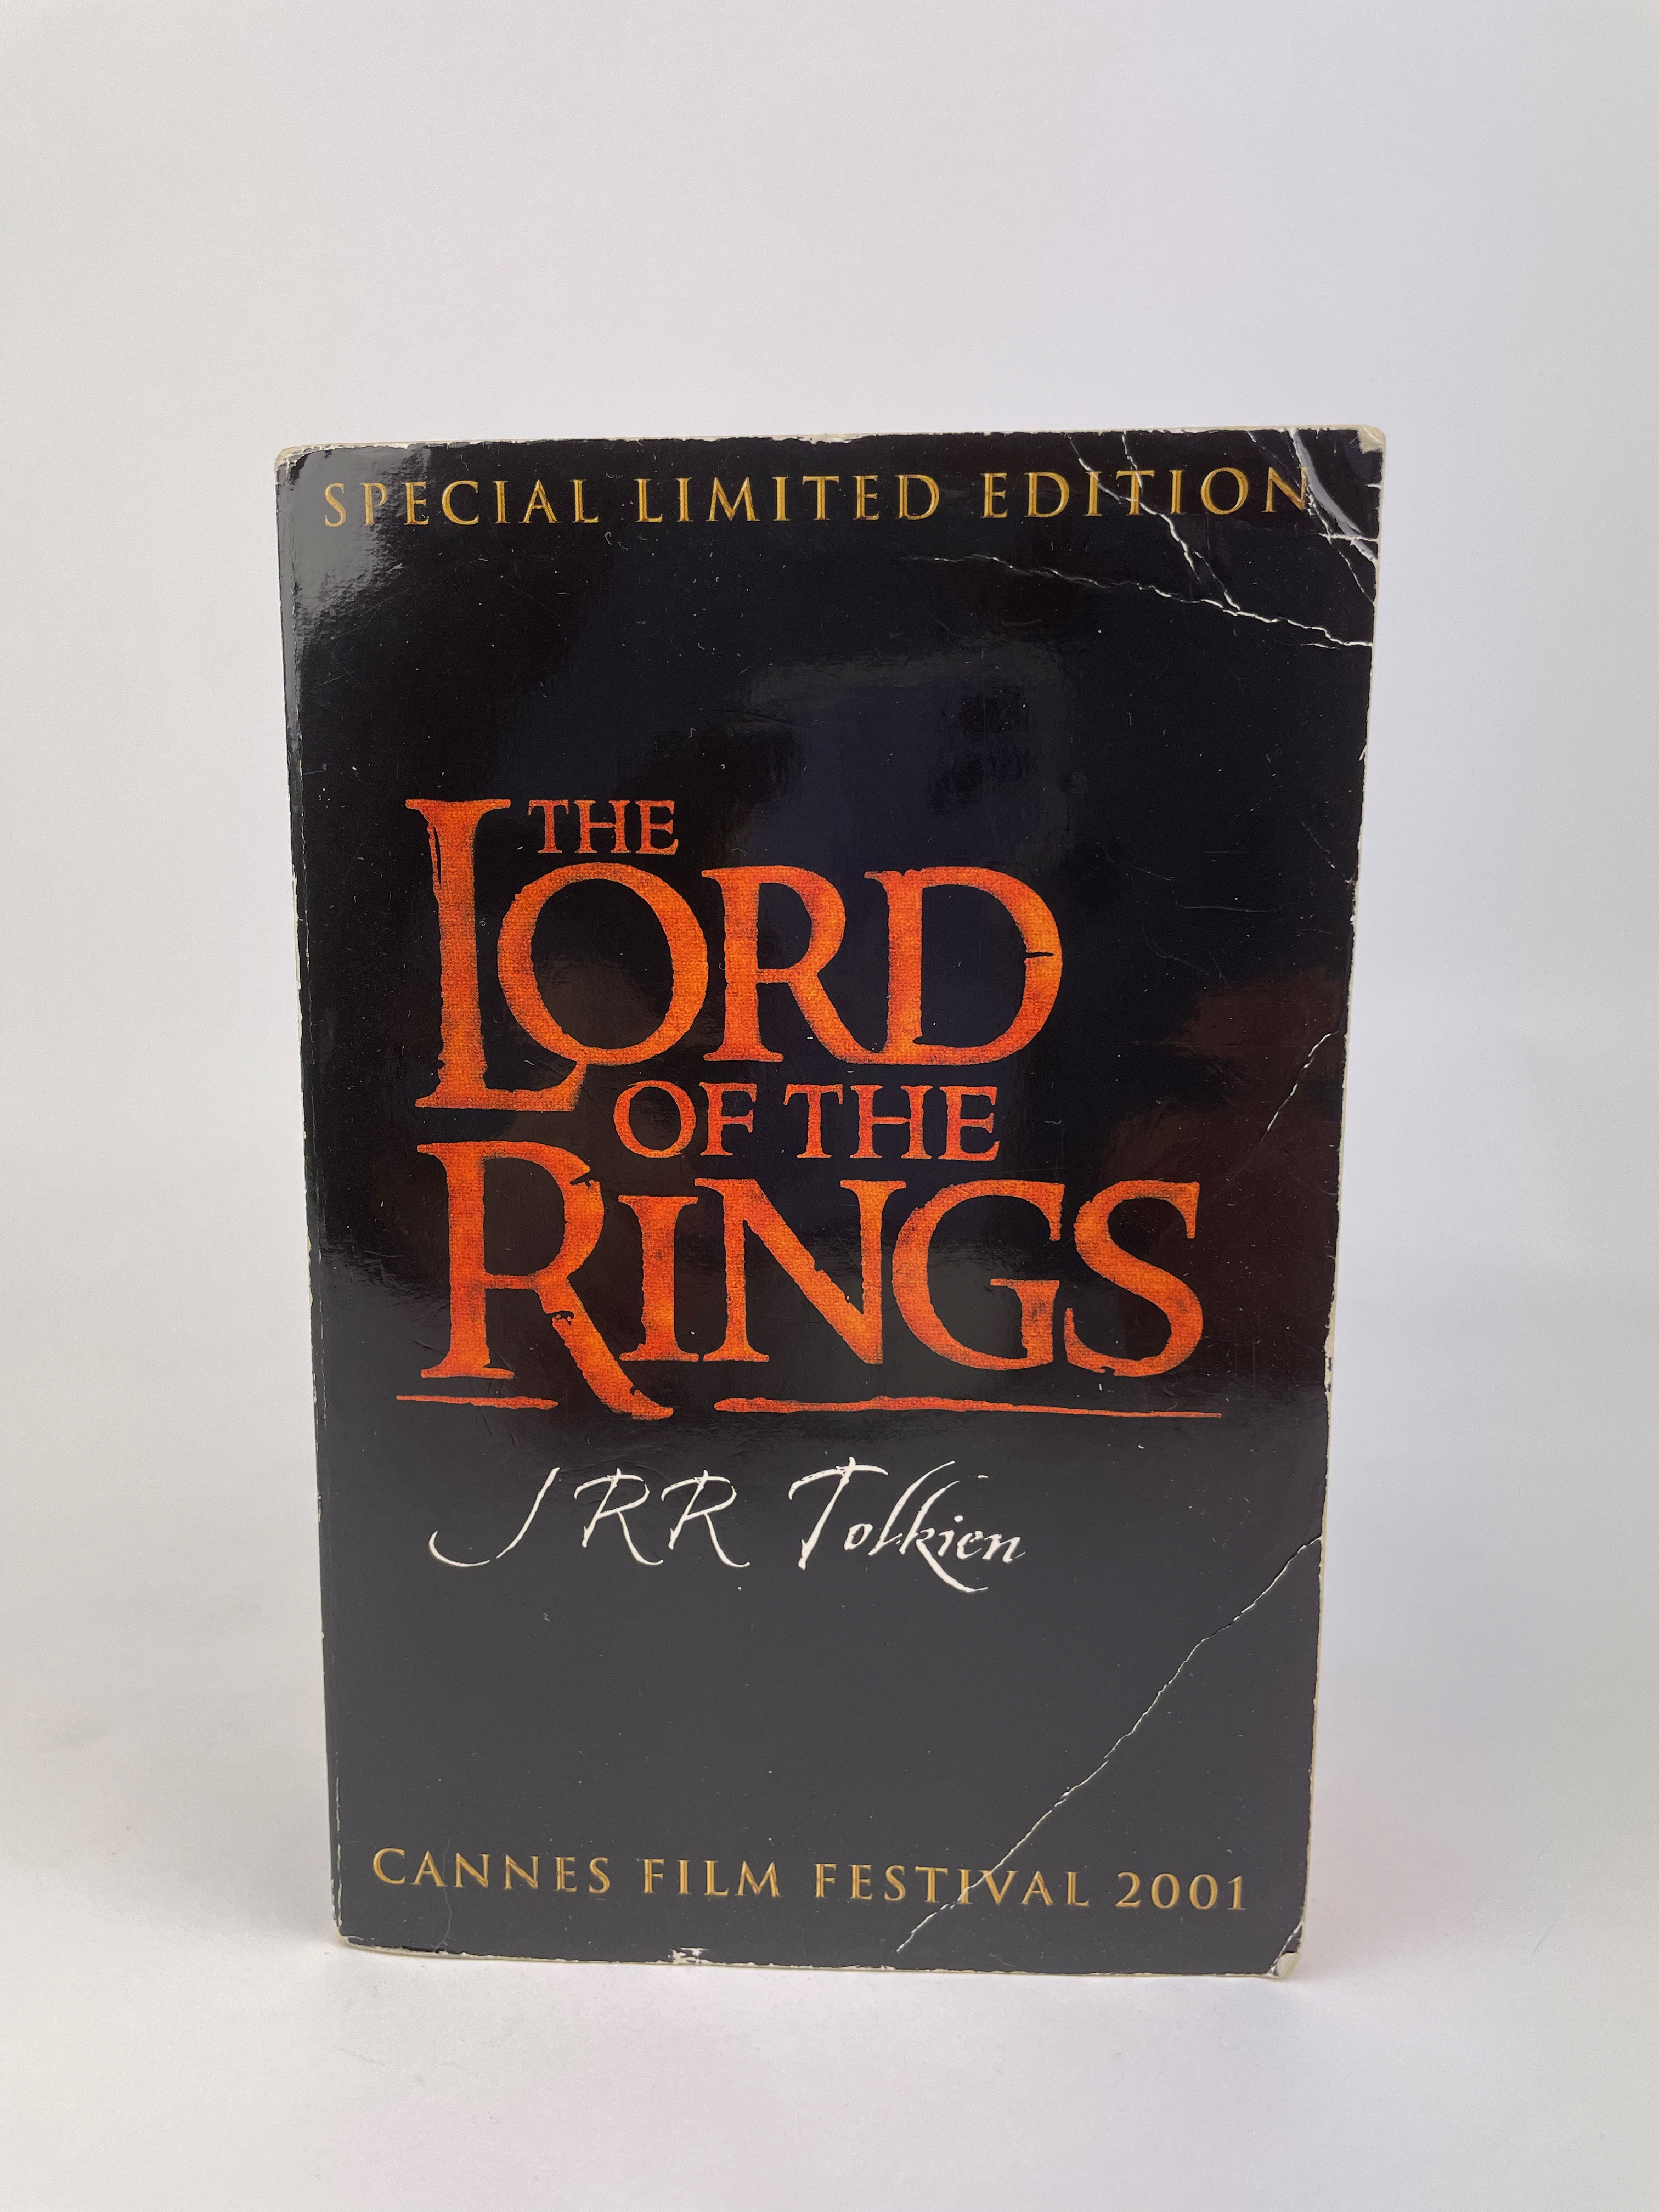 Cannes Special Exclusive Limited Edition of The Lord of the Rings by J.R.R. Tolkien published by Harpercollins, London, 2001